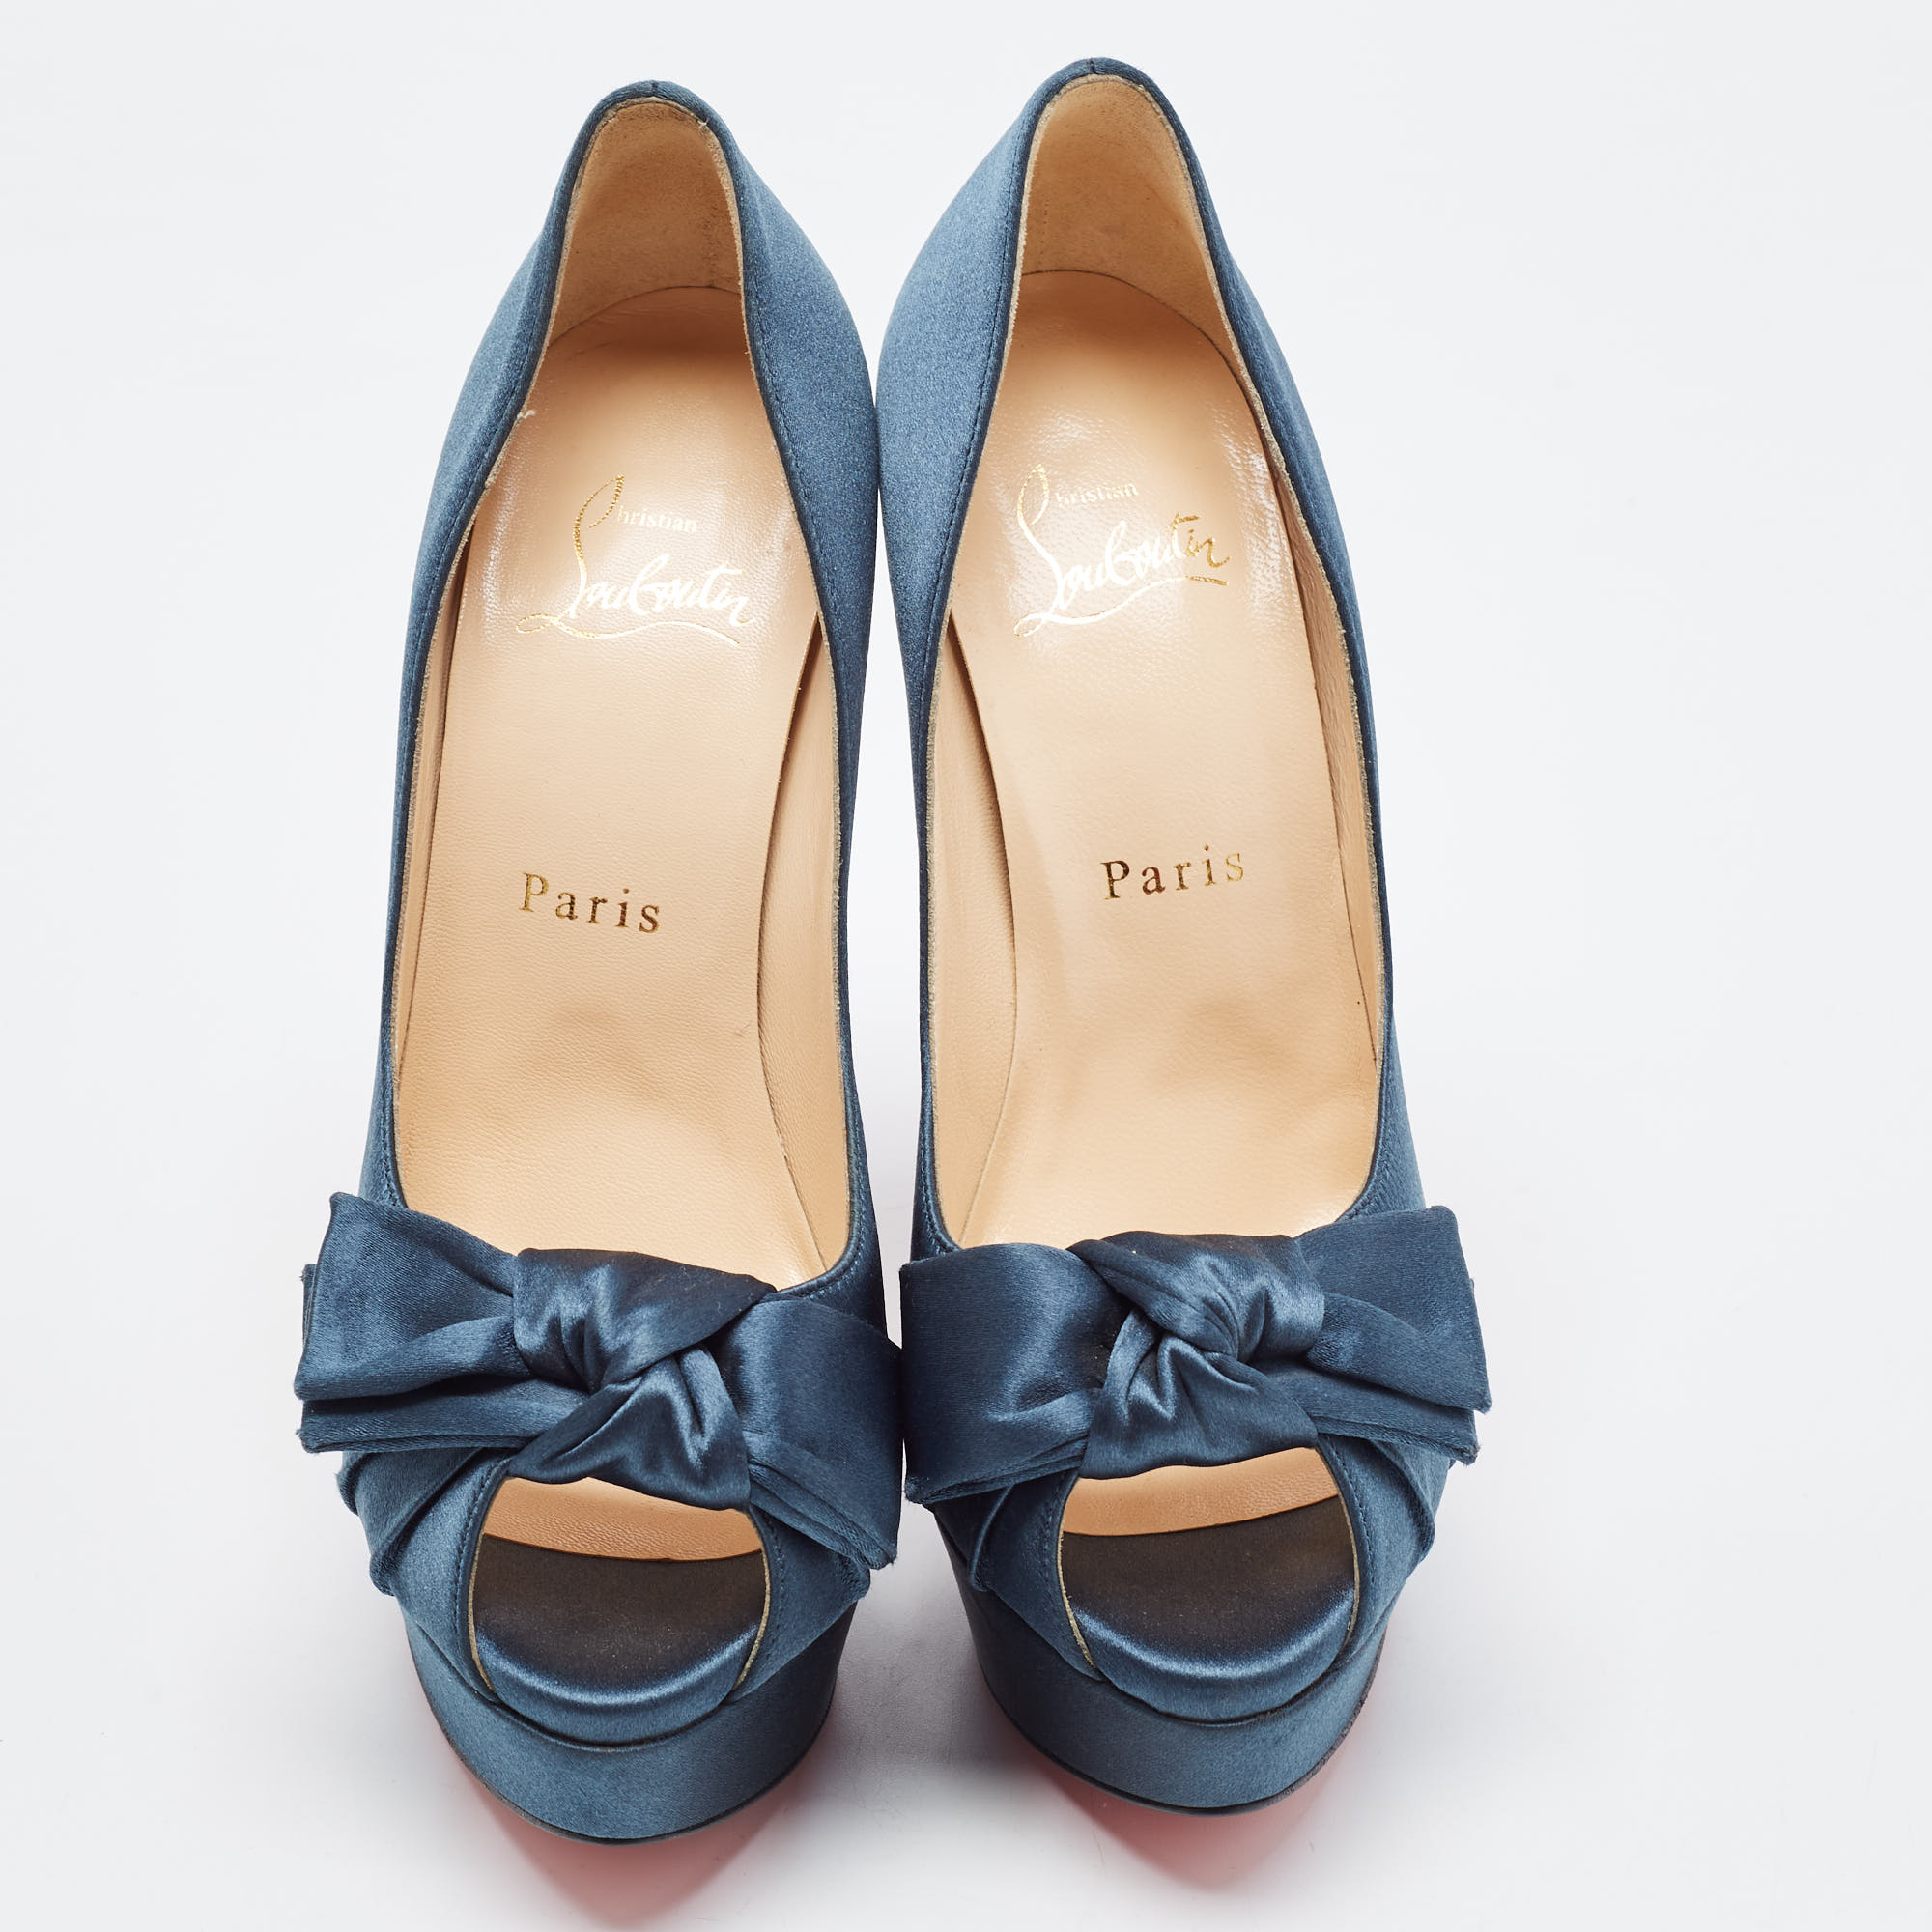 Christian Louboutin Teal Satin Madame Butterfly Pumps Size 37